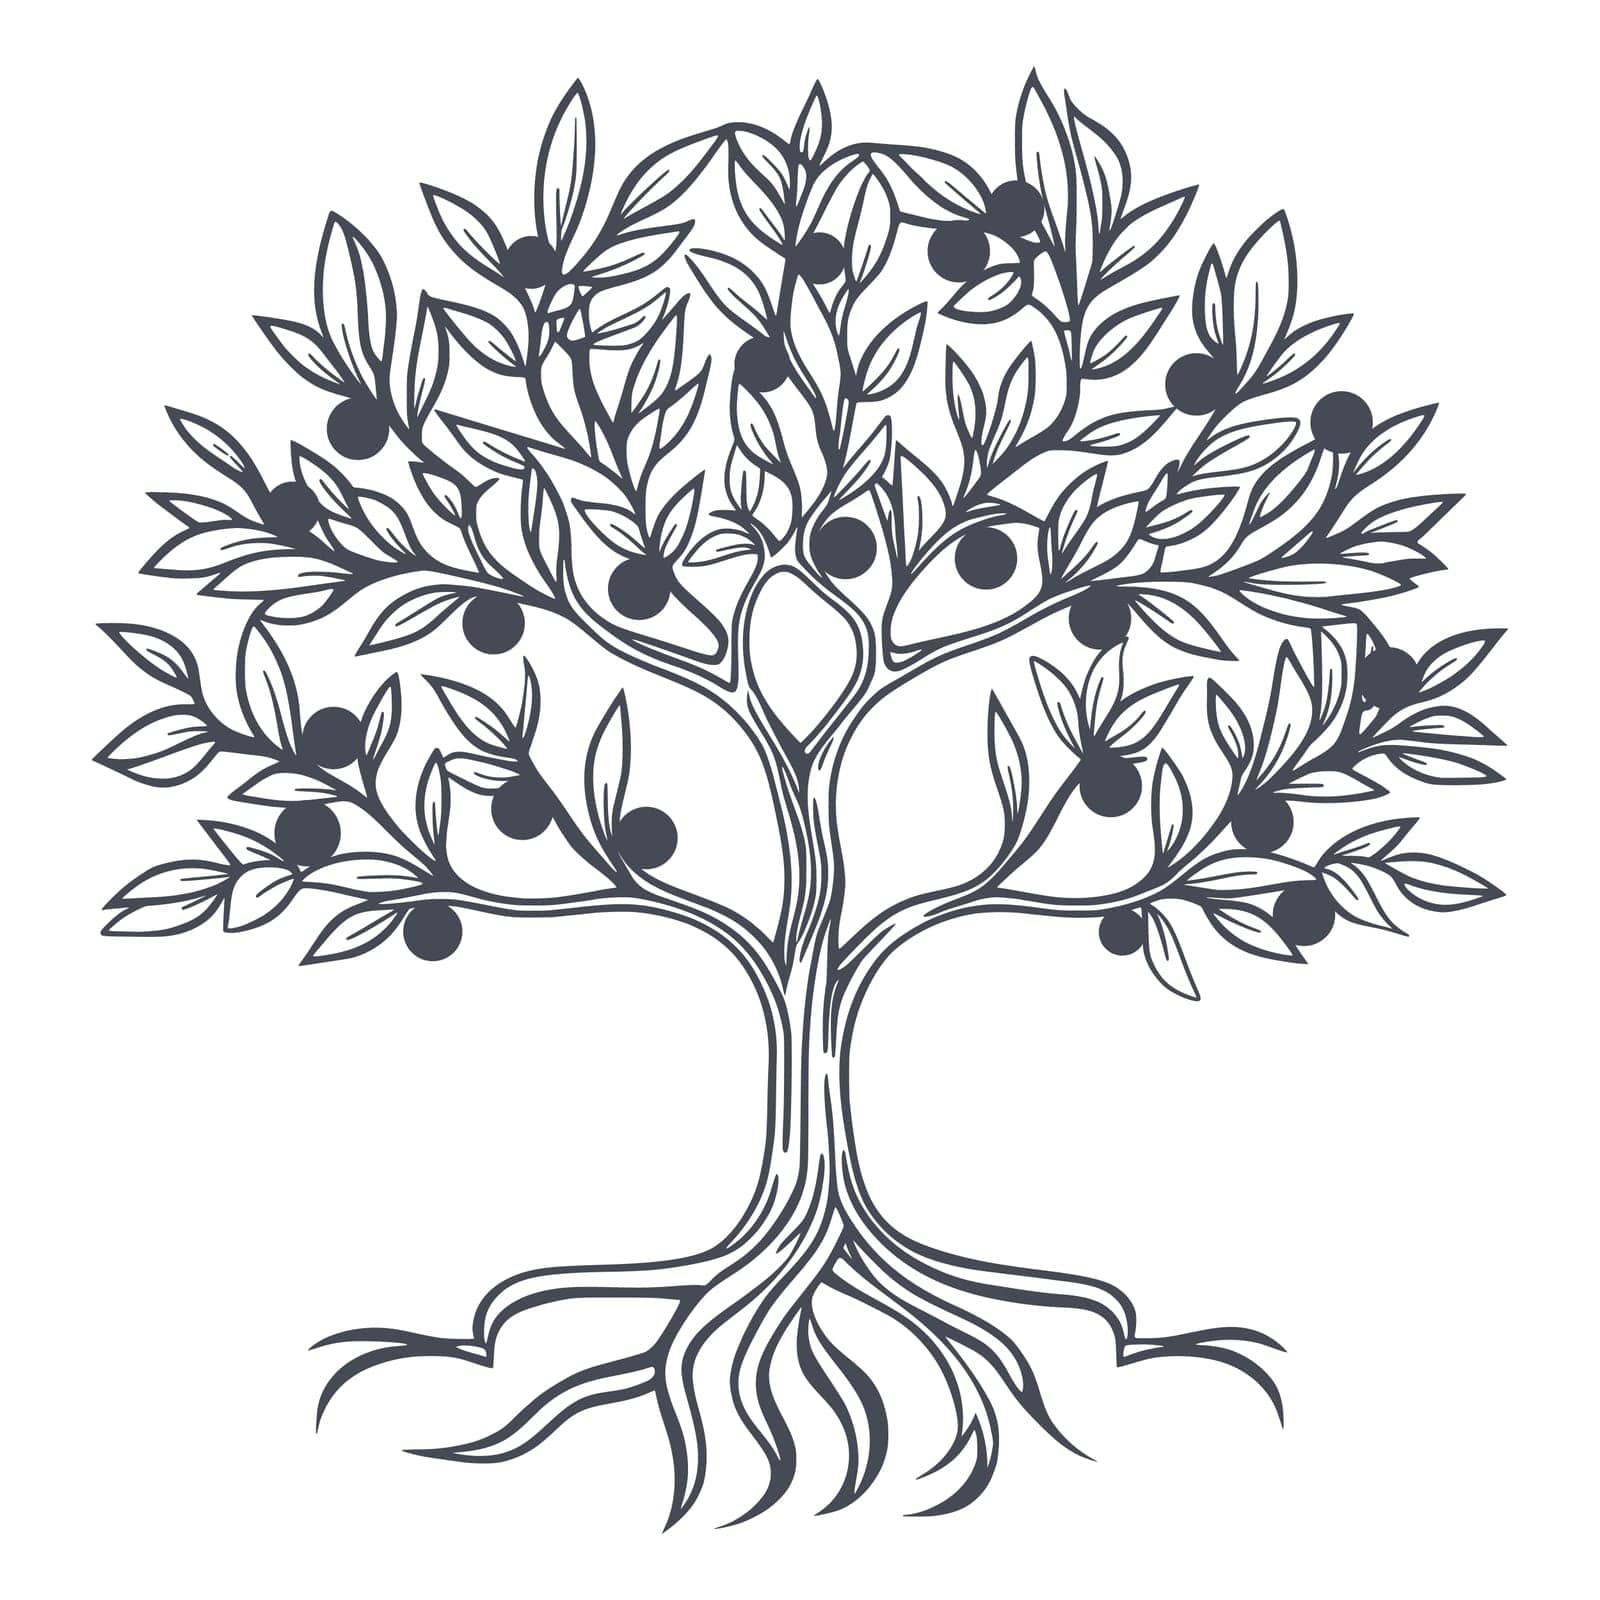 Apple tree with fruits hand engraved. Ripe apples on tree with foliage ink sketch. Simple fruit tree silhouette, isolated vector illustration